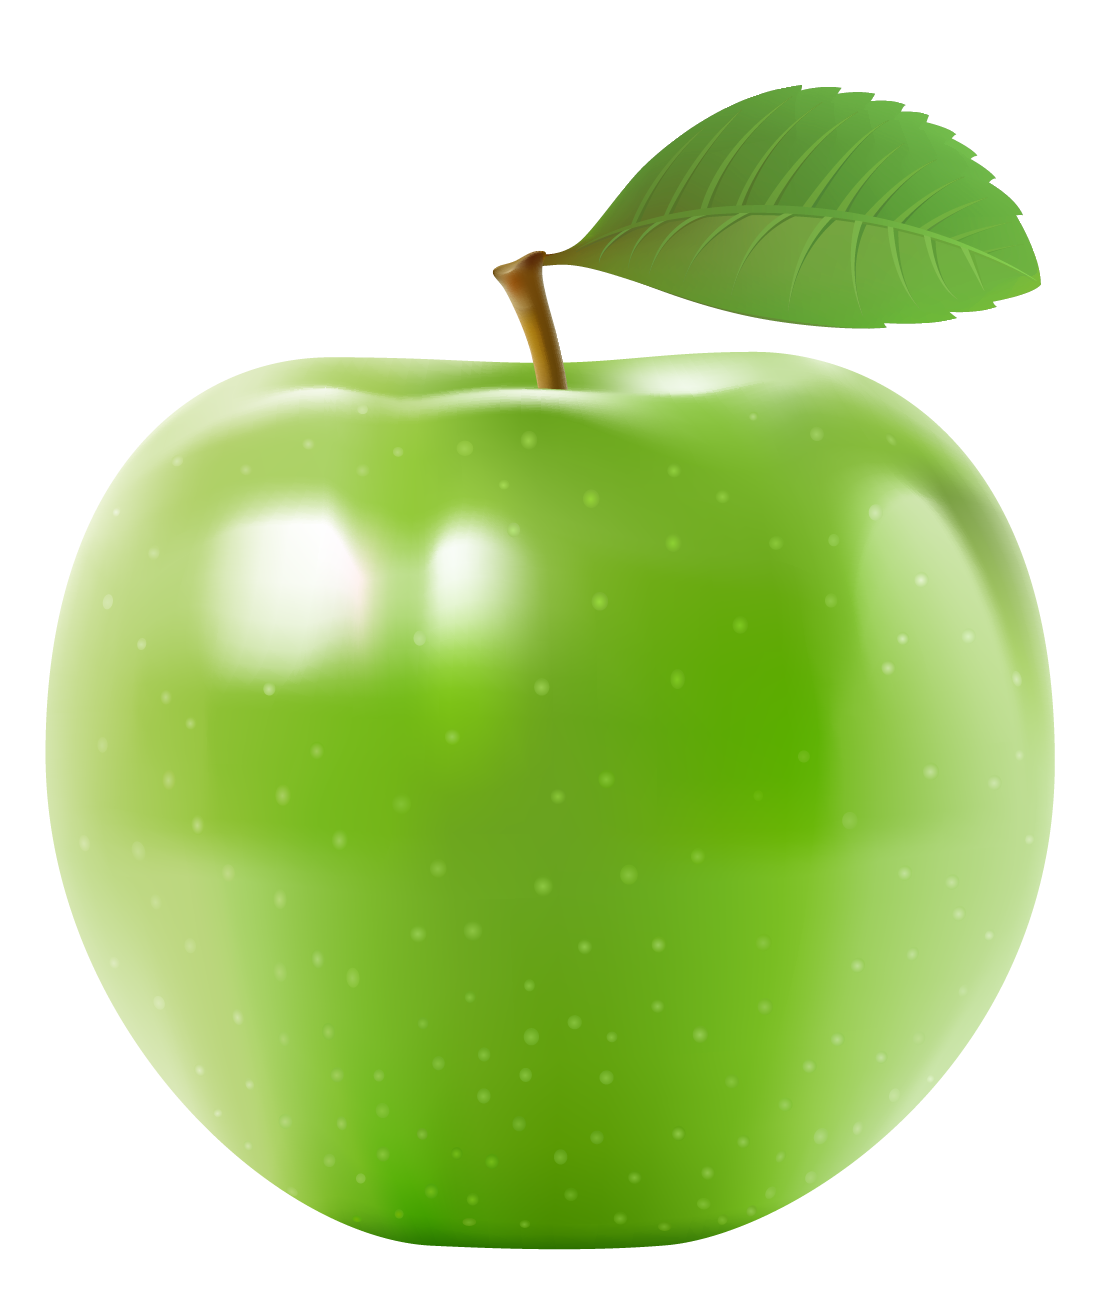 Apple PNG - 9522